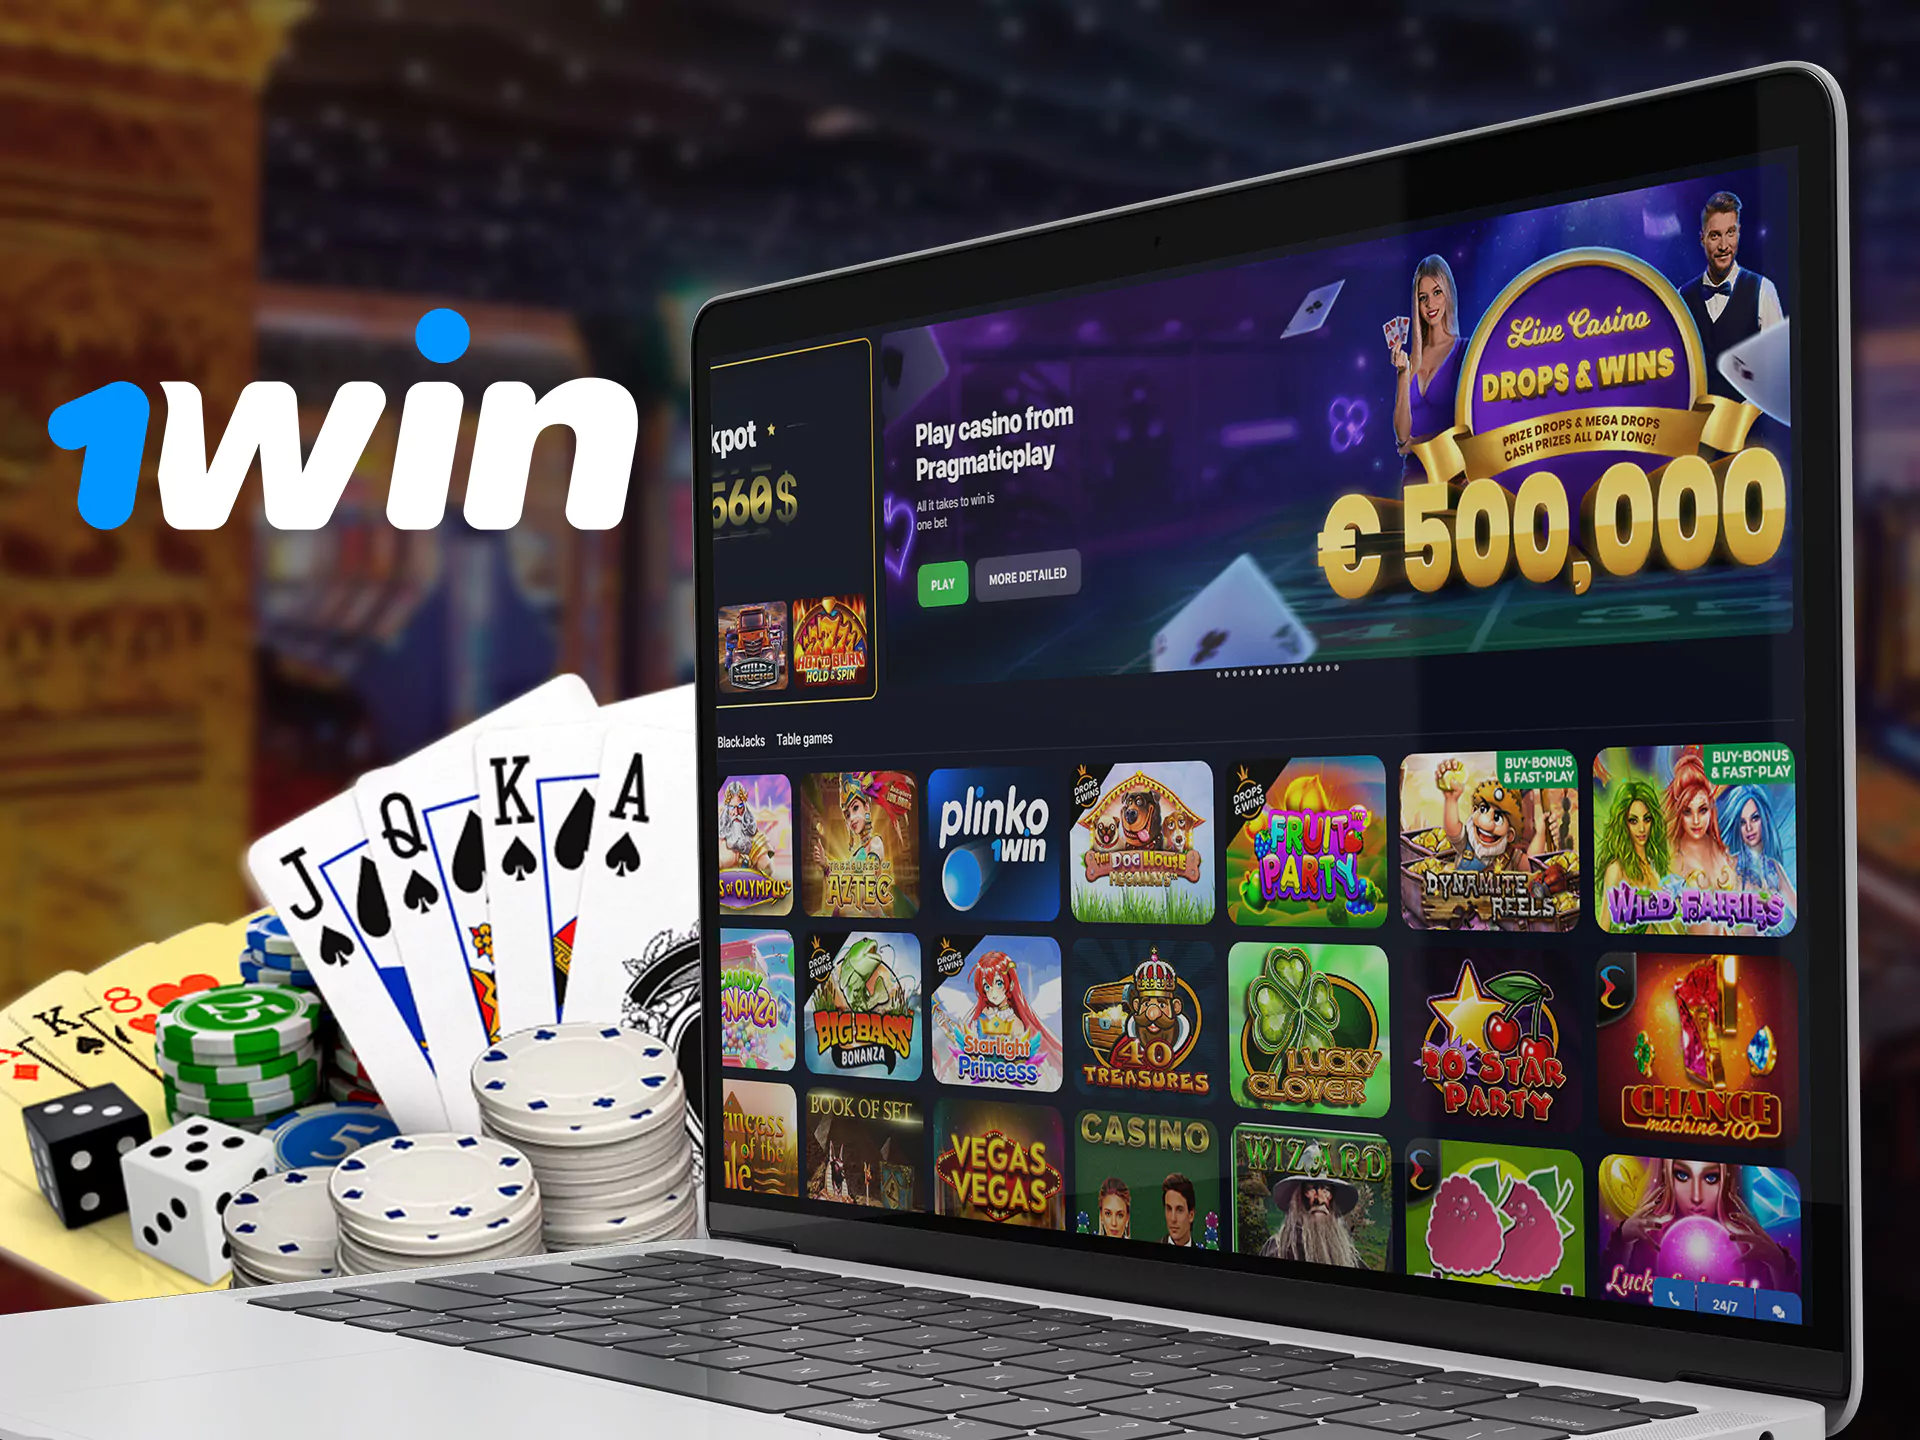 Choose your favourite casino game at 1win.